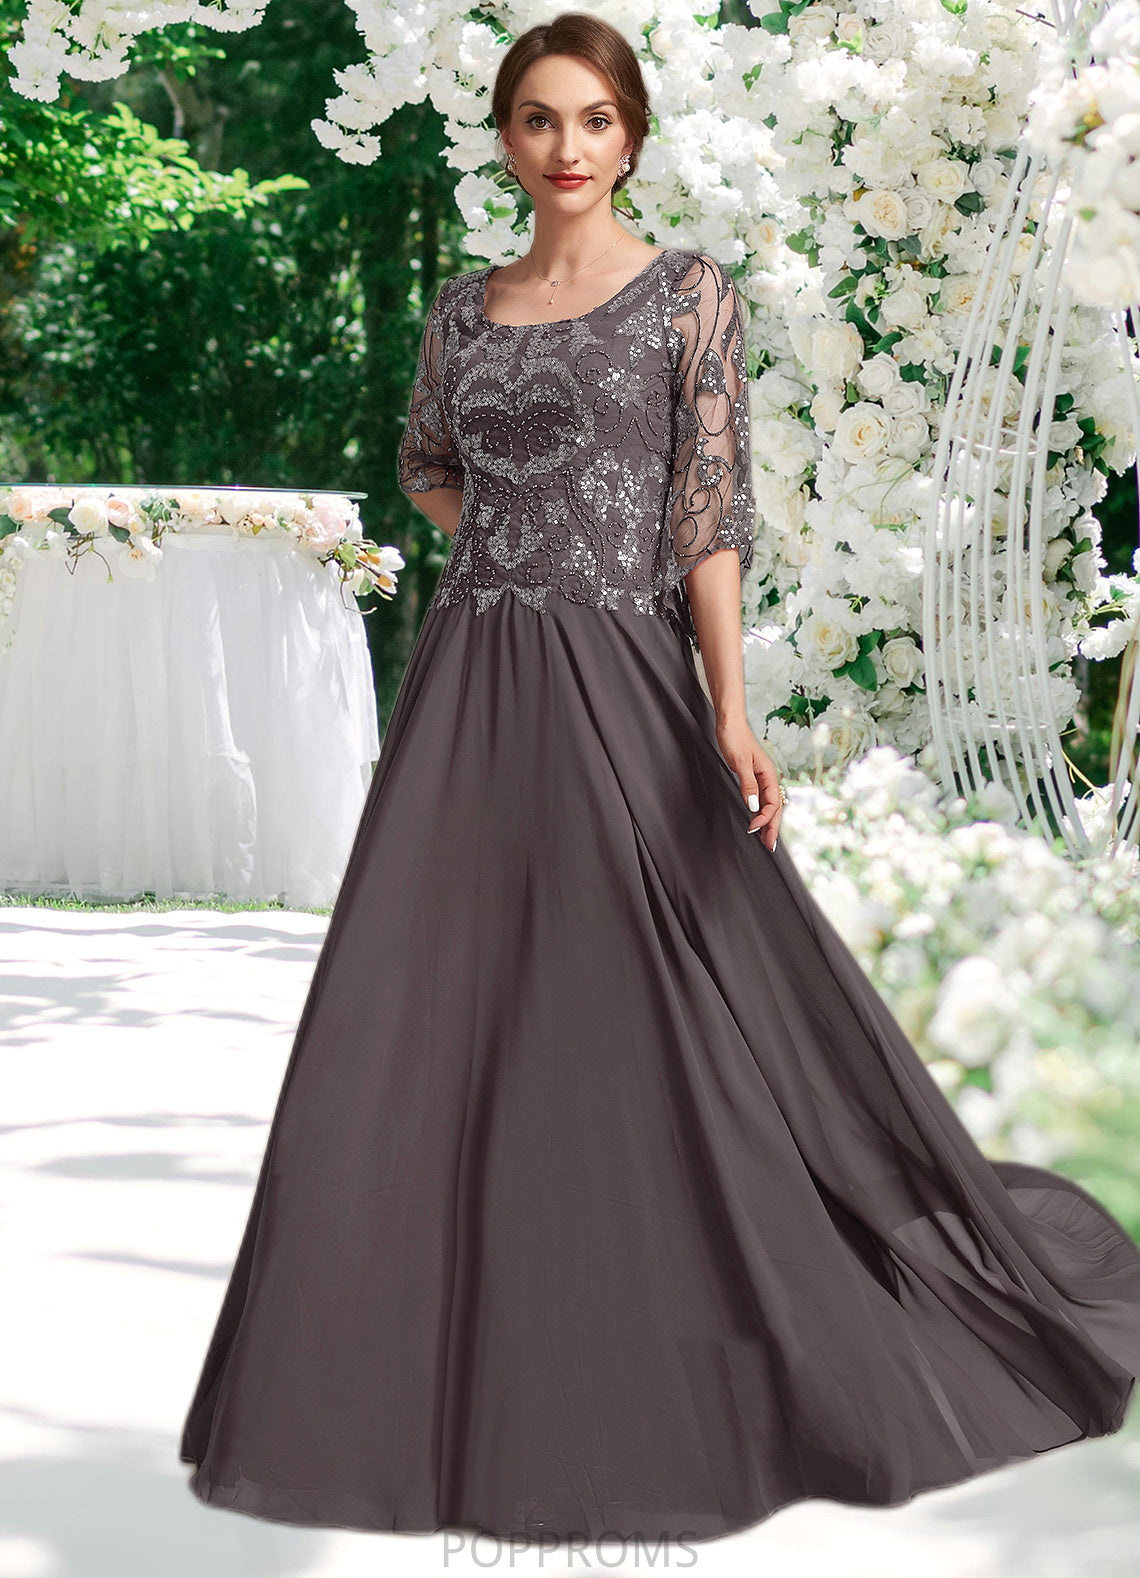 Amina A-Line Scoop Neck Floor-Length Chiffon Lace Mother of the Bride Dress With Beading Sequins PP6126P0015036